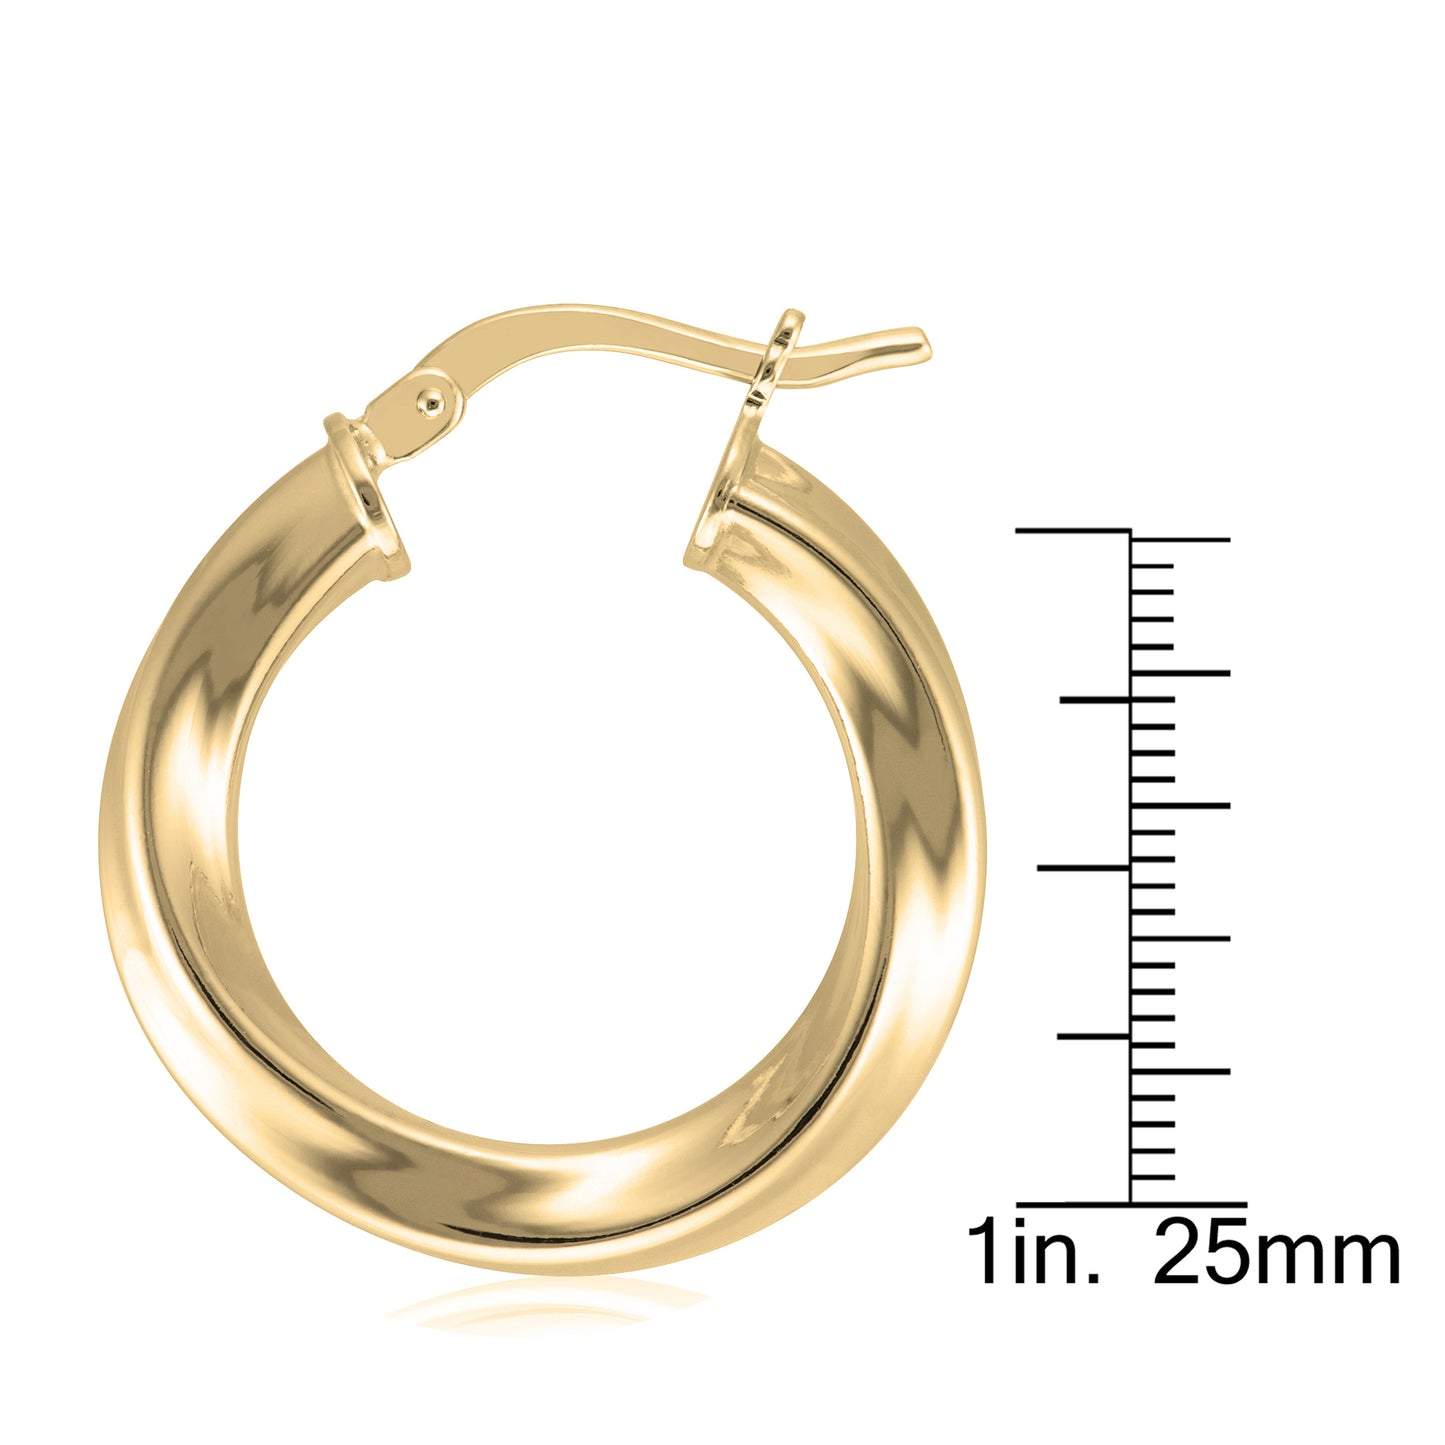 Yellow Gold Twisted Round Polished Hoop Earrings